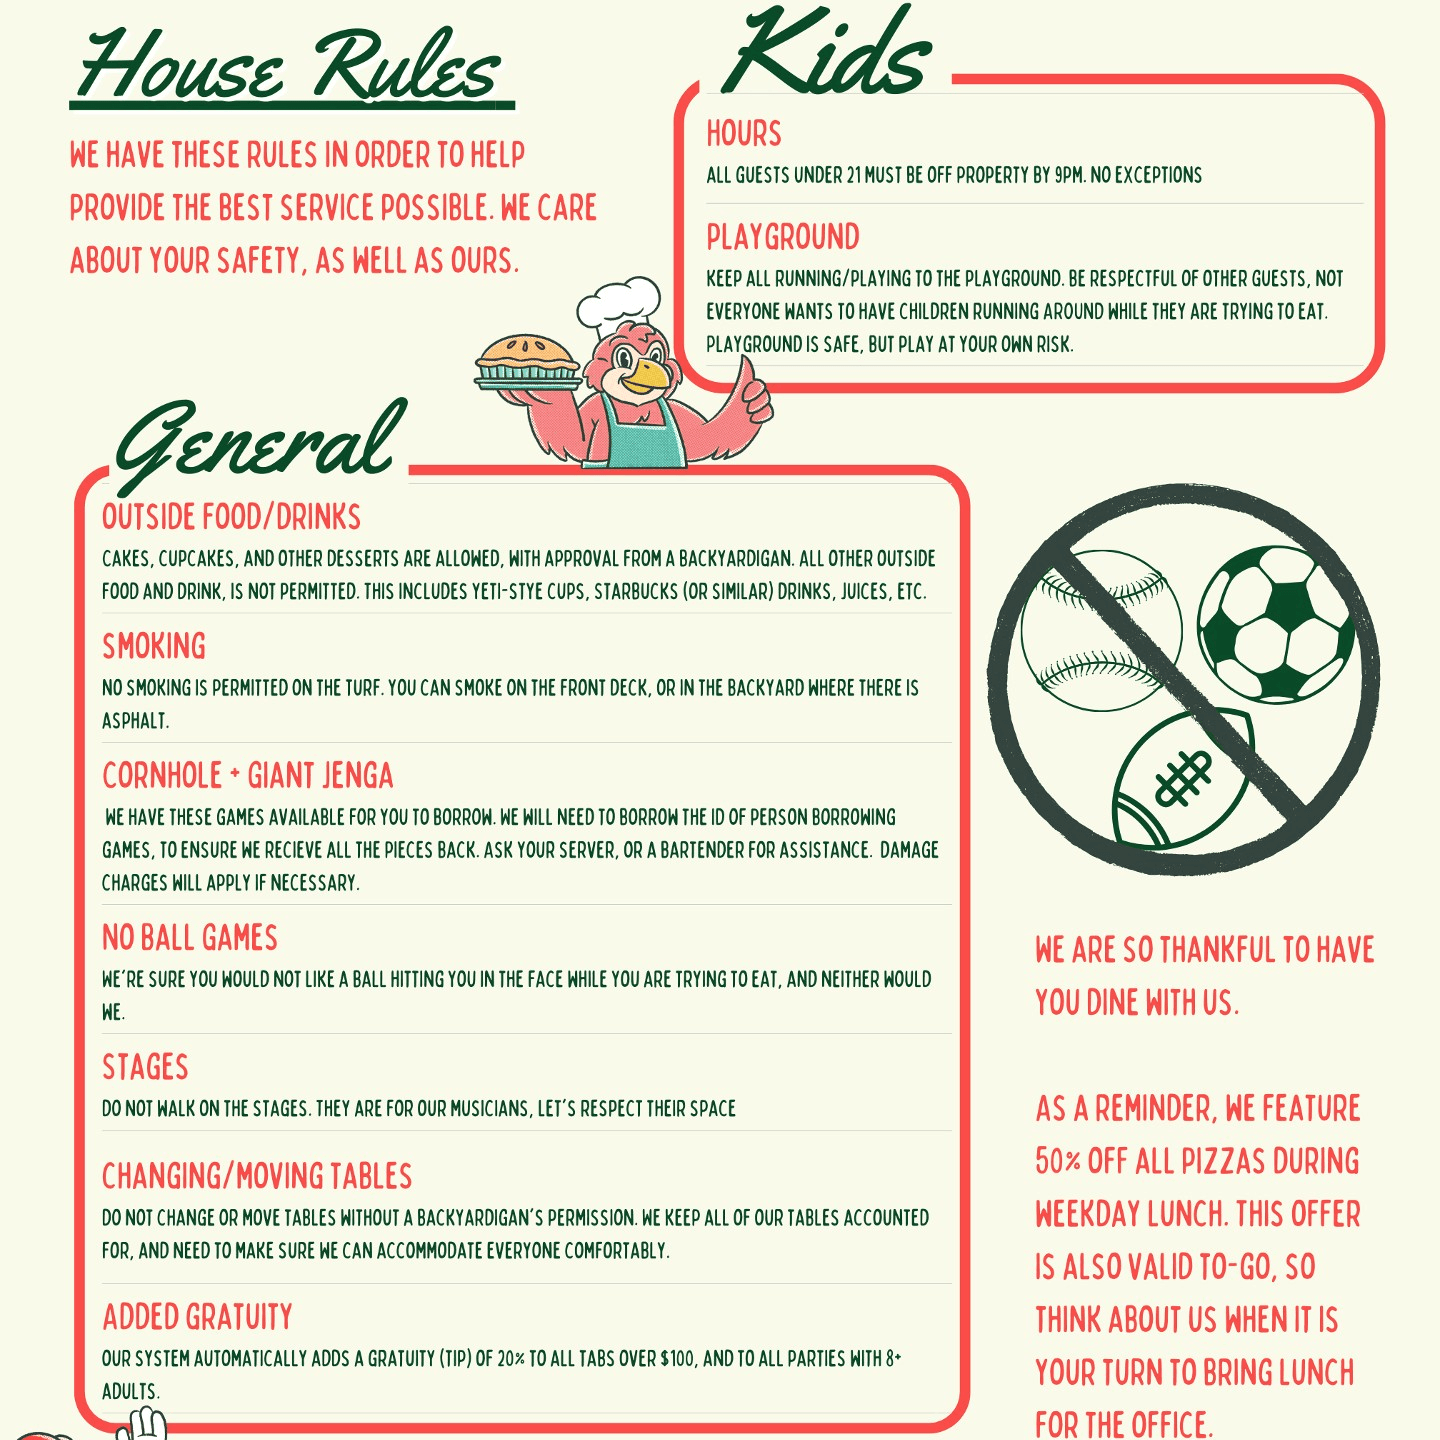 House Rules - for service and safety!